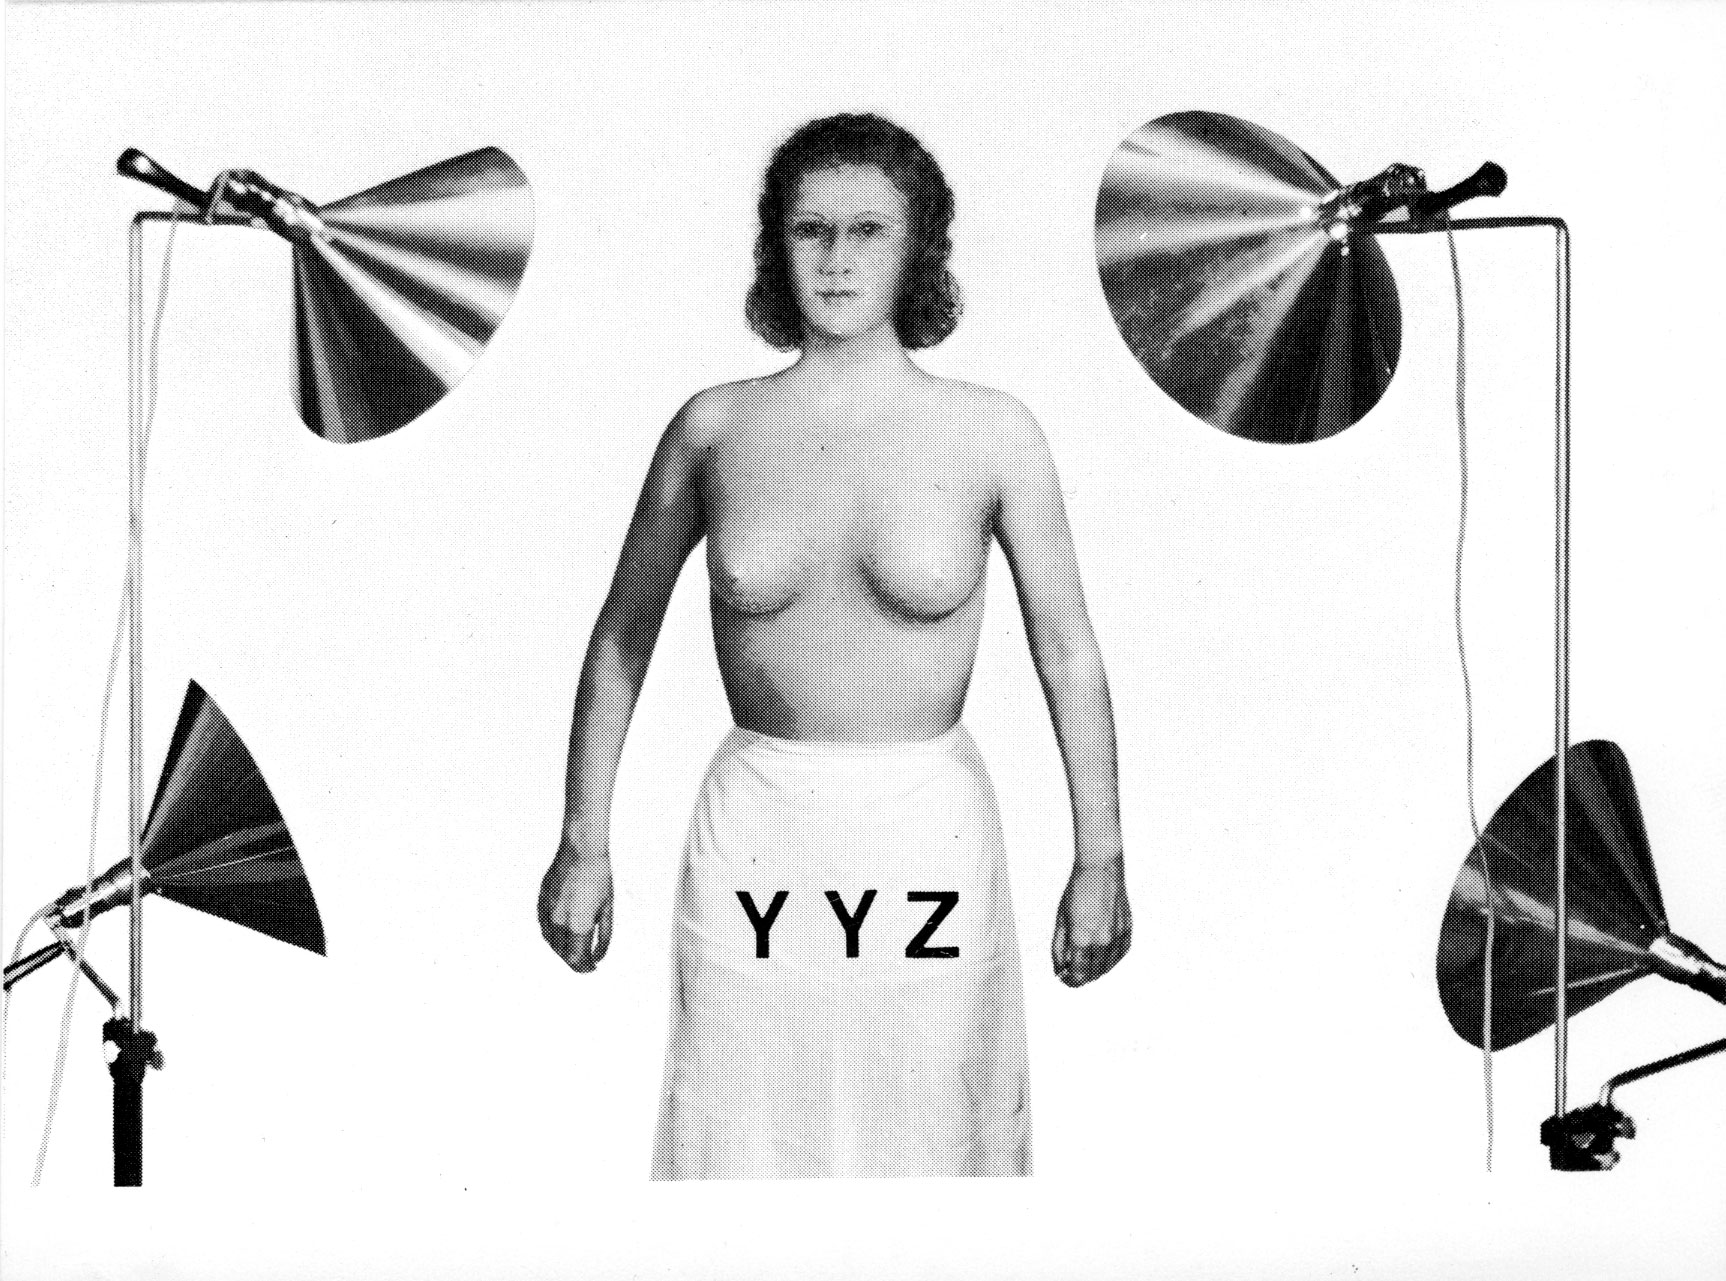 Scanned black and white collage of a feminine figure, pot lights and YYZ logo